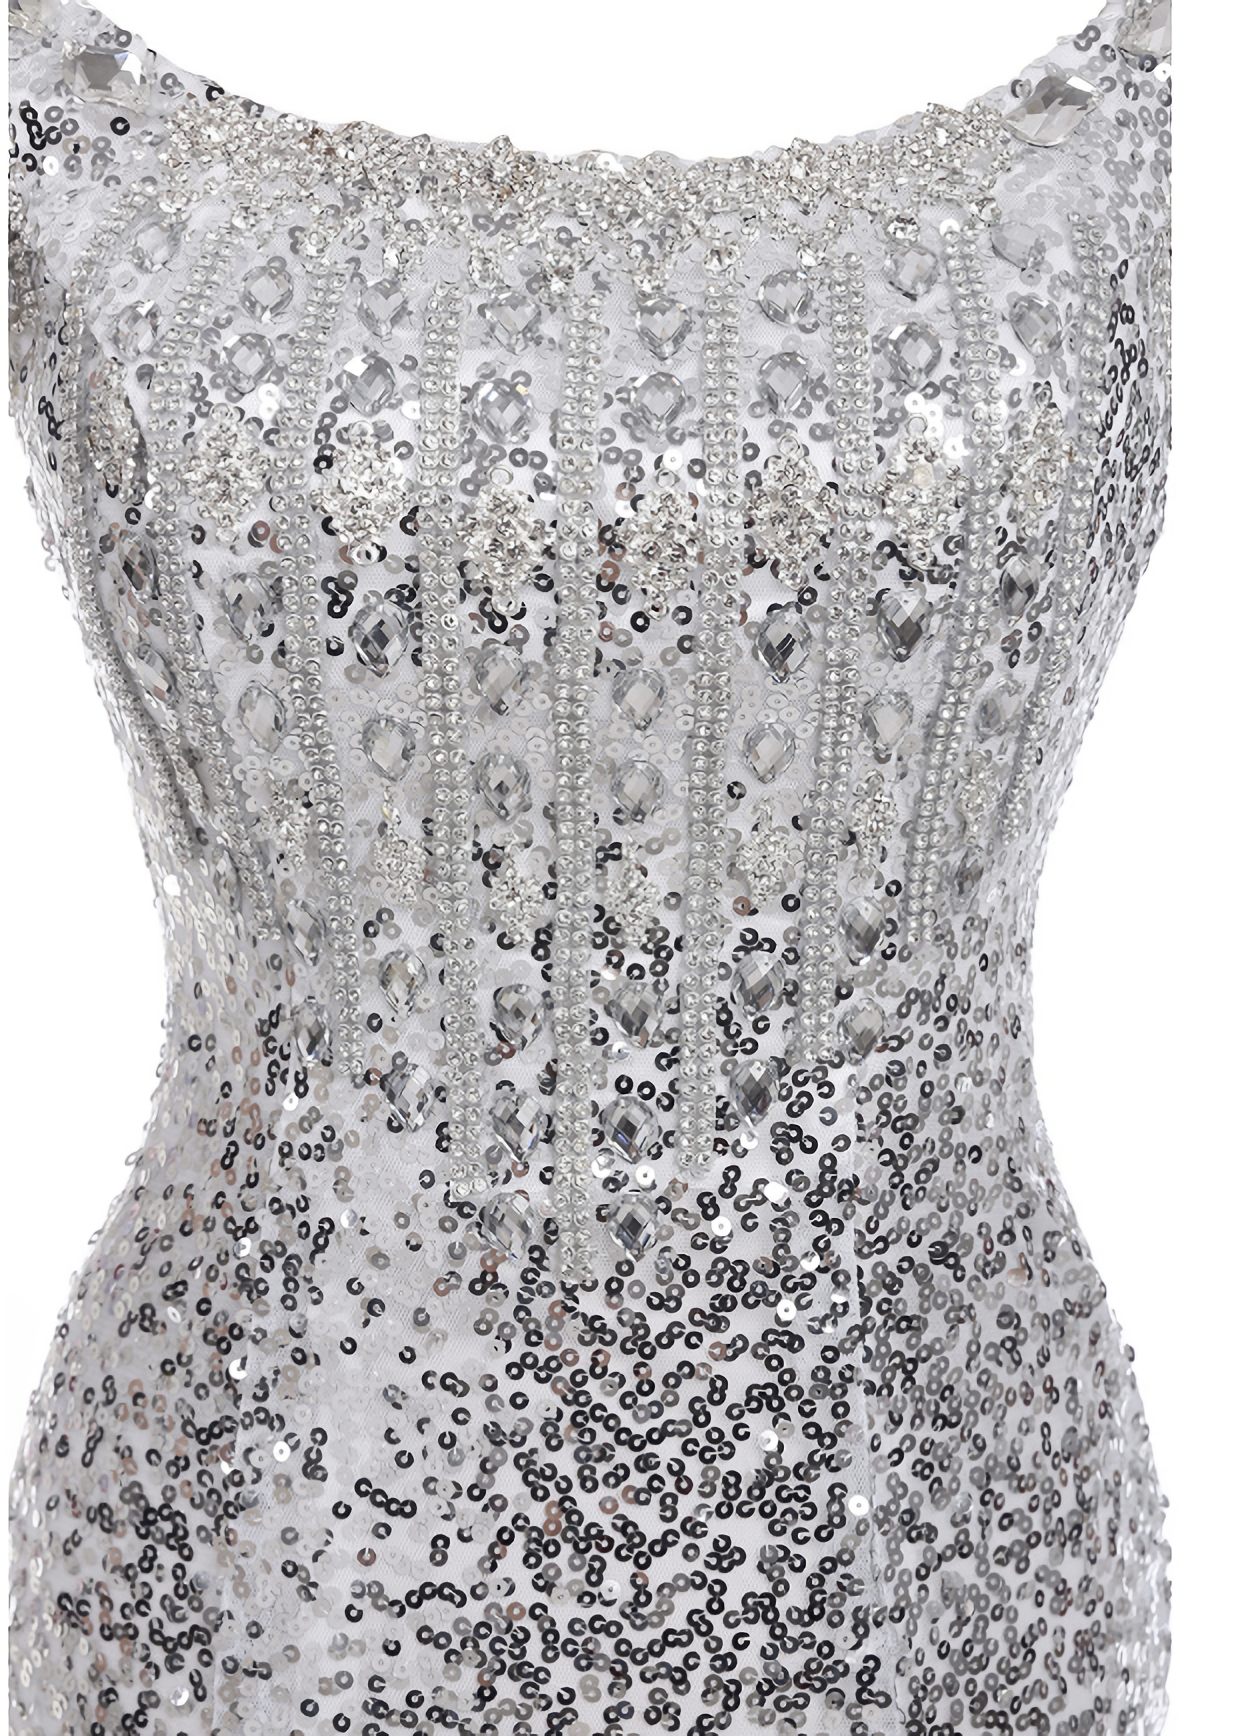 Party Dress Ideas For Winter, The long mermaids with a silver Evening Dresses